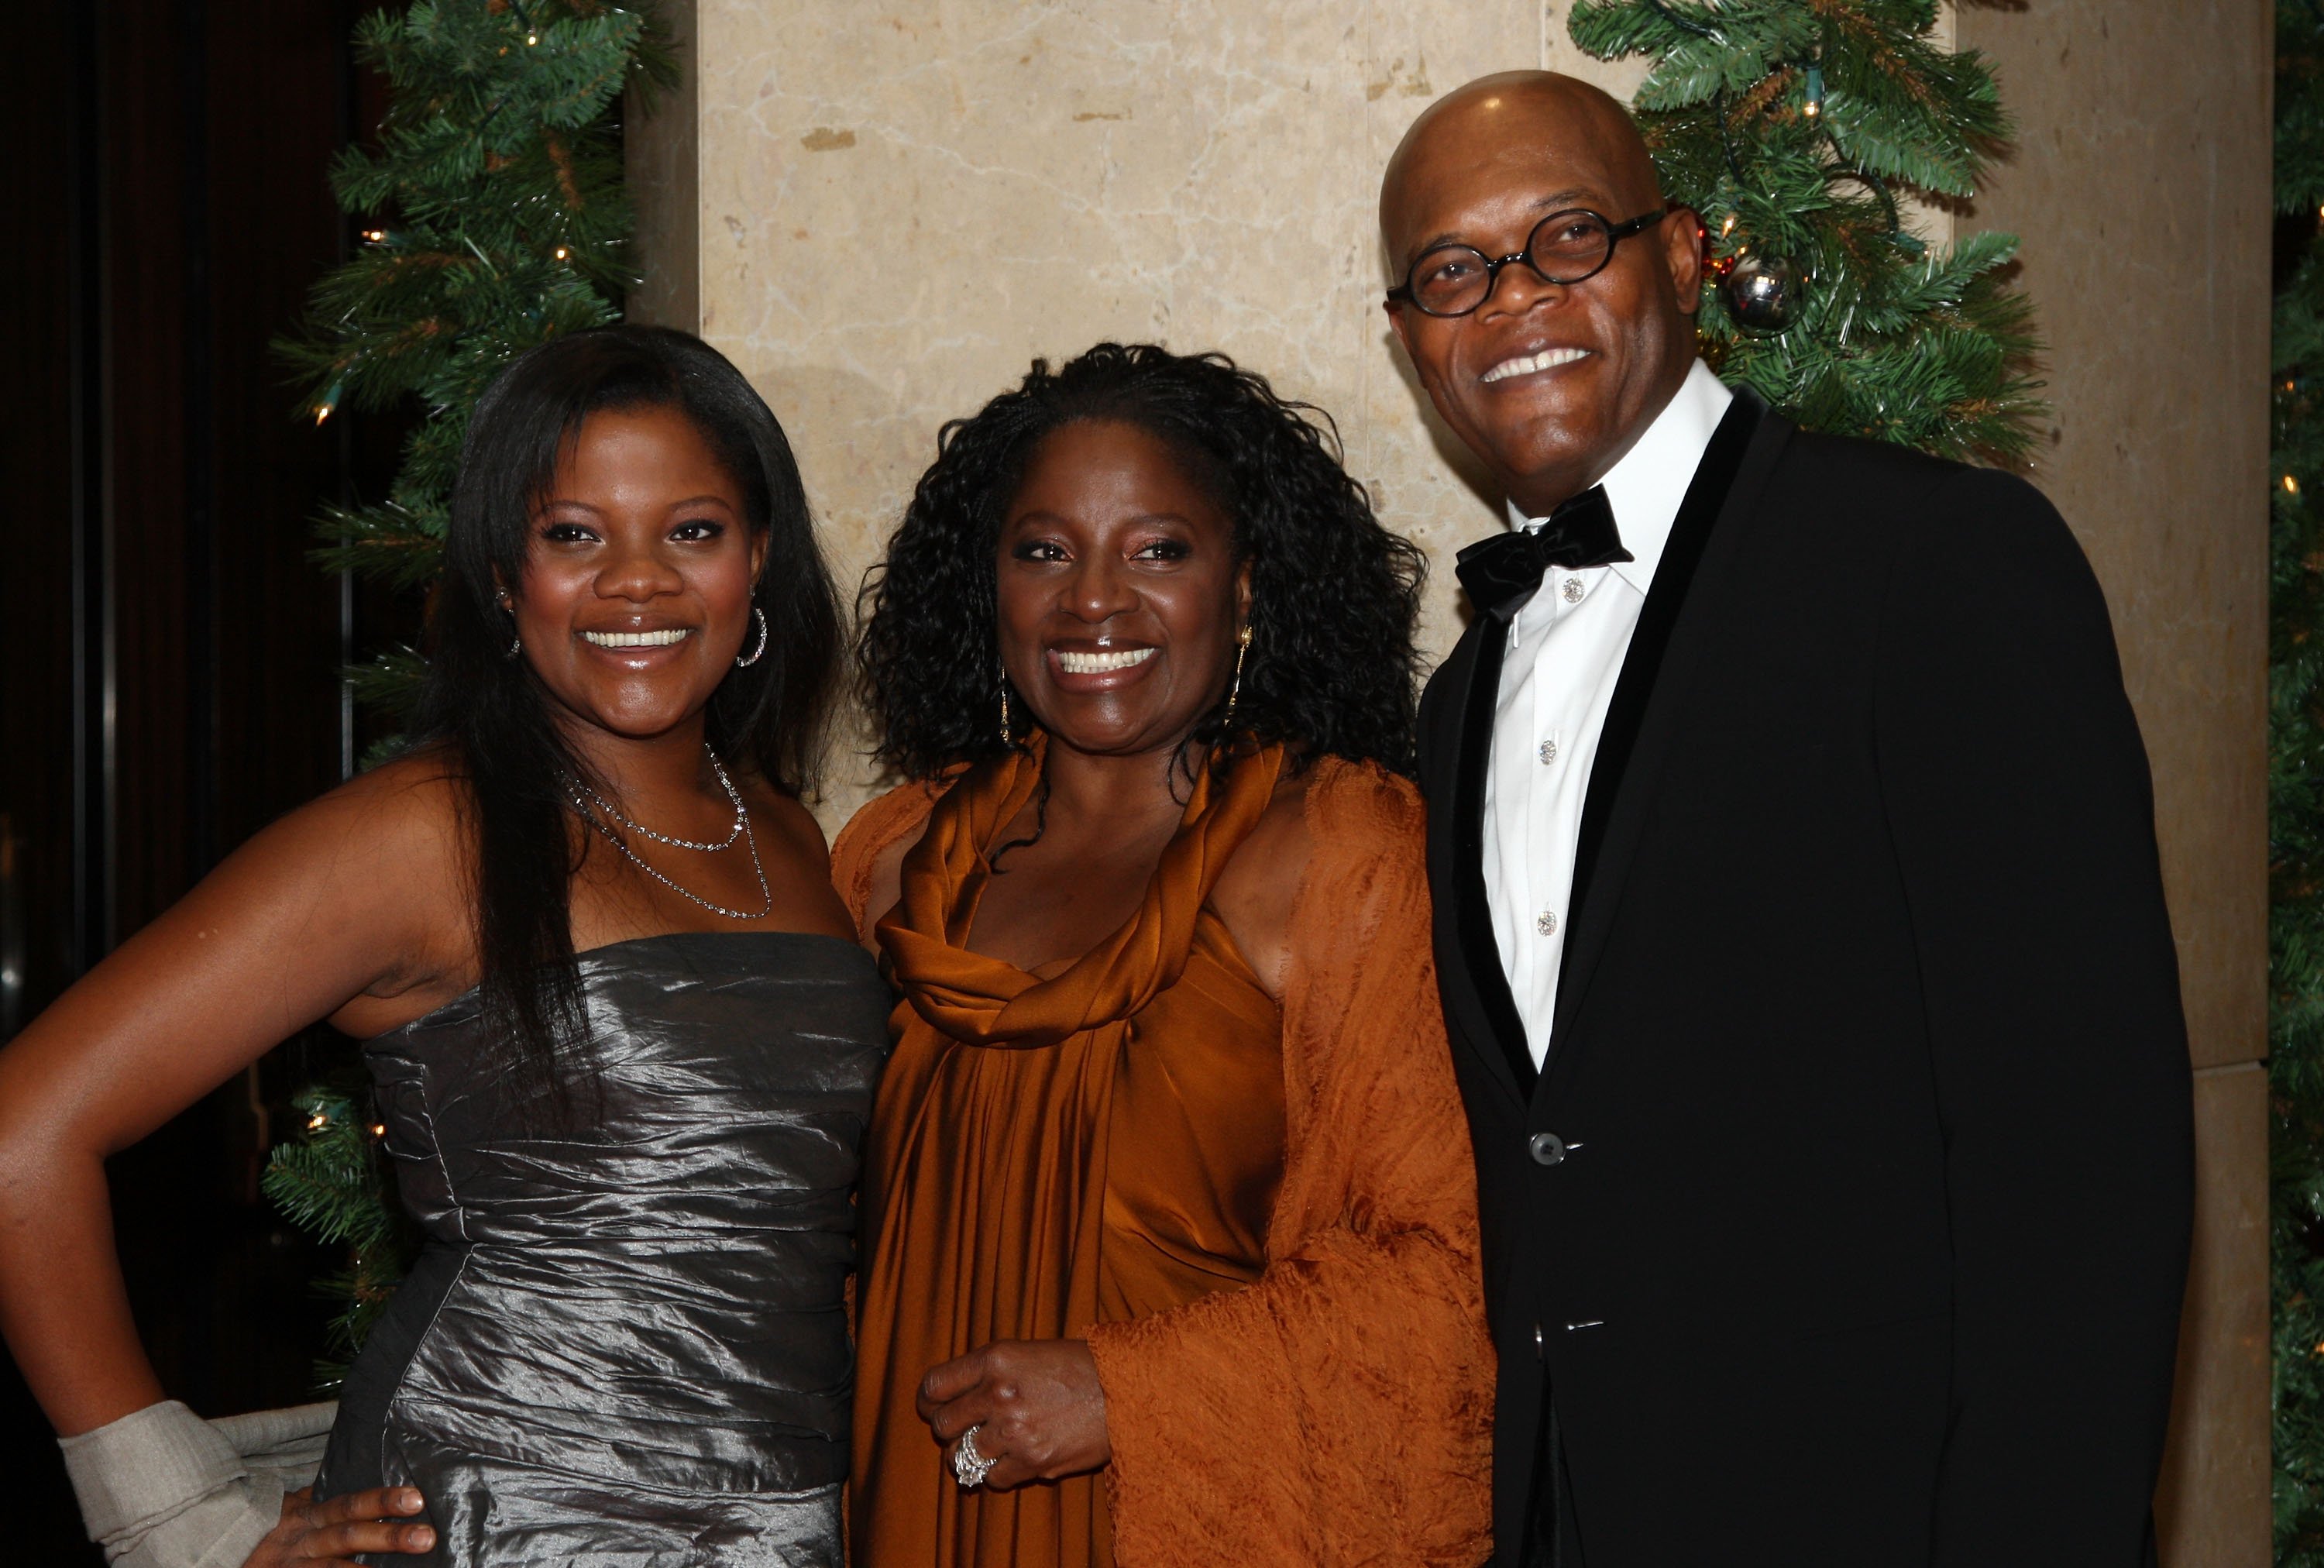 Samuel L. Jackson (far R), LaTanya Richardson (C) & Zoe Jackson at the 23rd annual American Cinematheque show on Dec. 1, 2008 in Beverly Hills | Photo: Getty Images